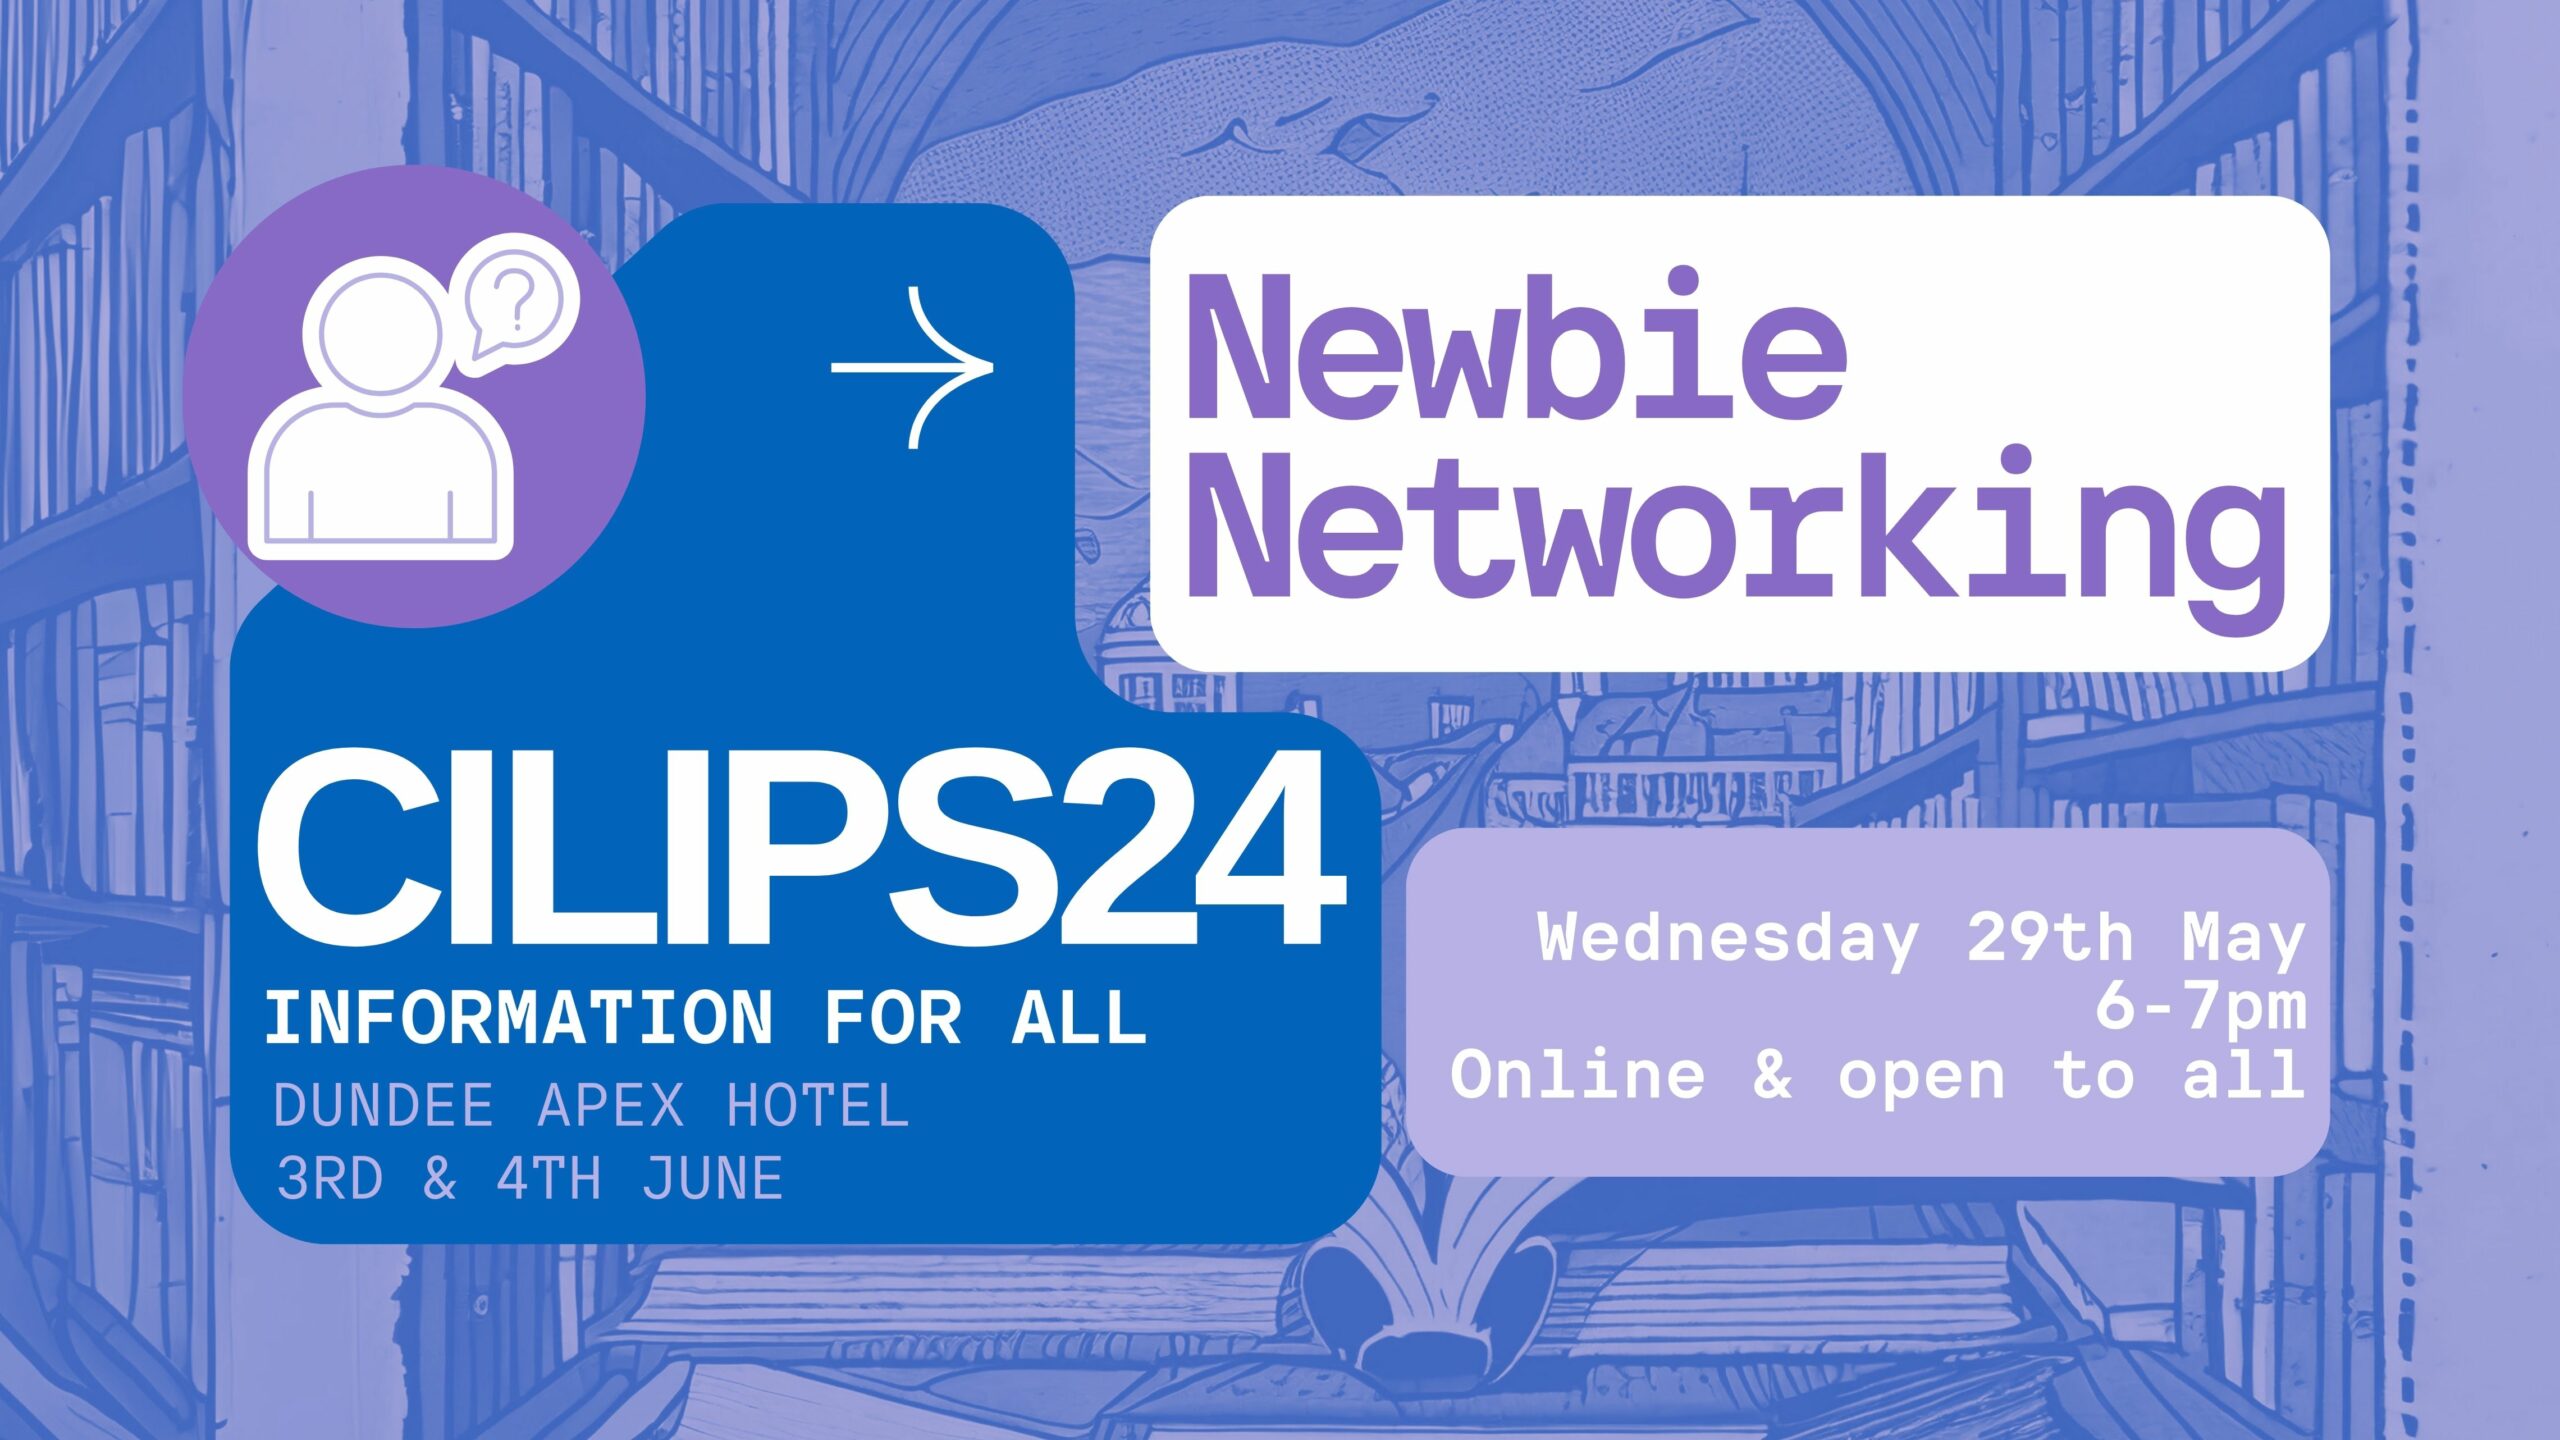 CILIPS24, Newbie Networking. Wednesday 29th May, 6-7pm, online and open to all. Information for all, Dundee Apex Hotel. June 3rd and 4th.